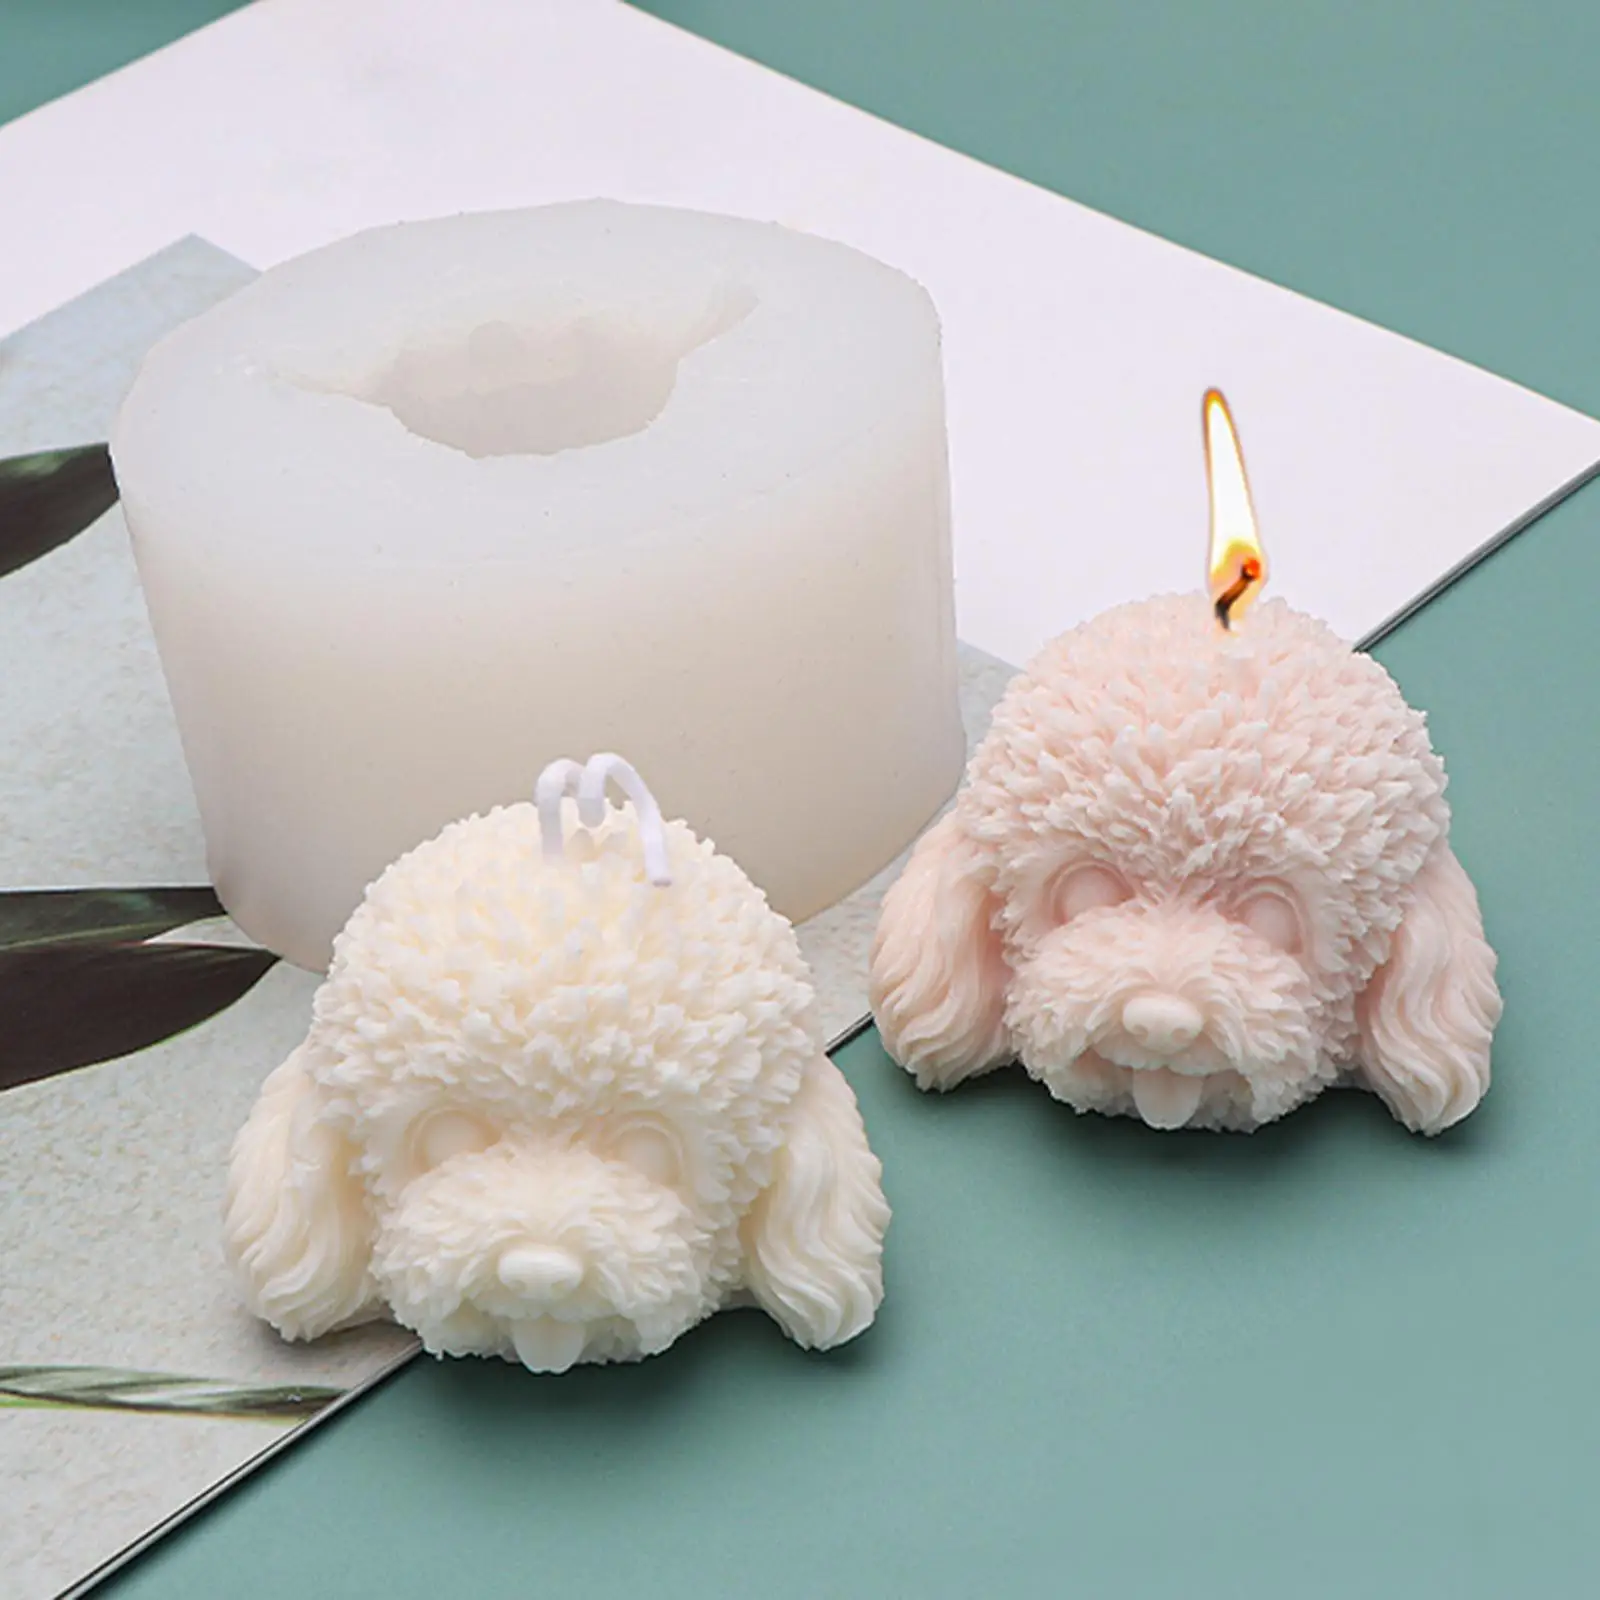 Silicone 3D Candle Making Resin Casting Handmade for Candle Cake